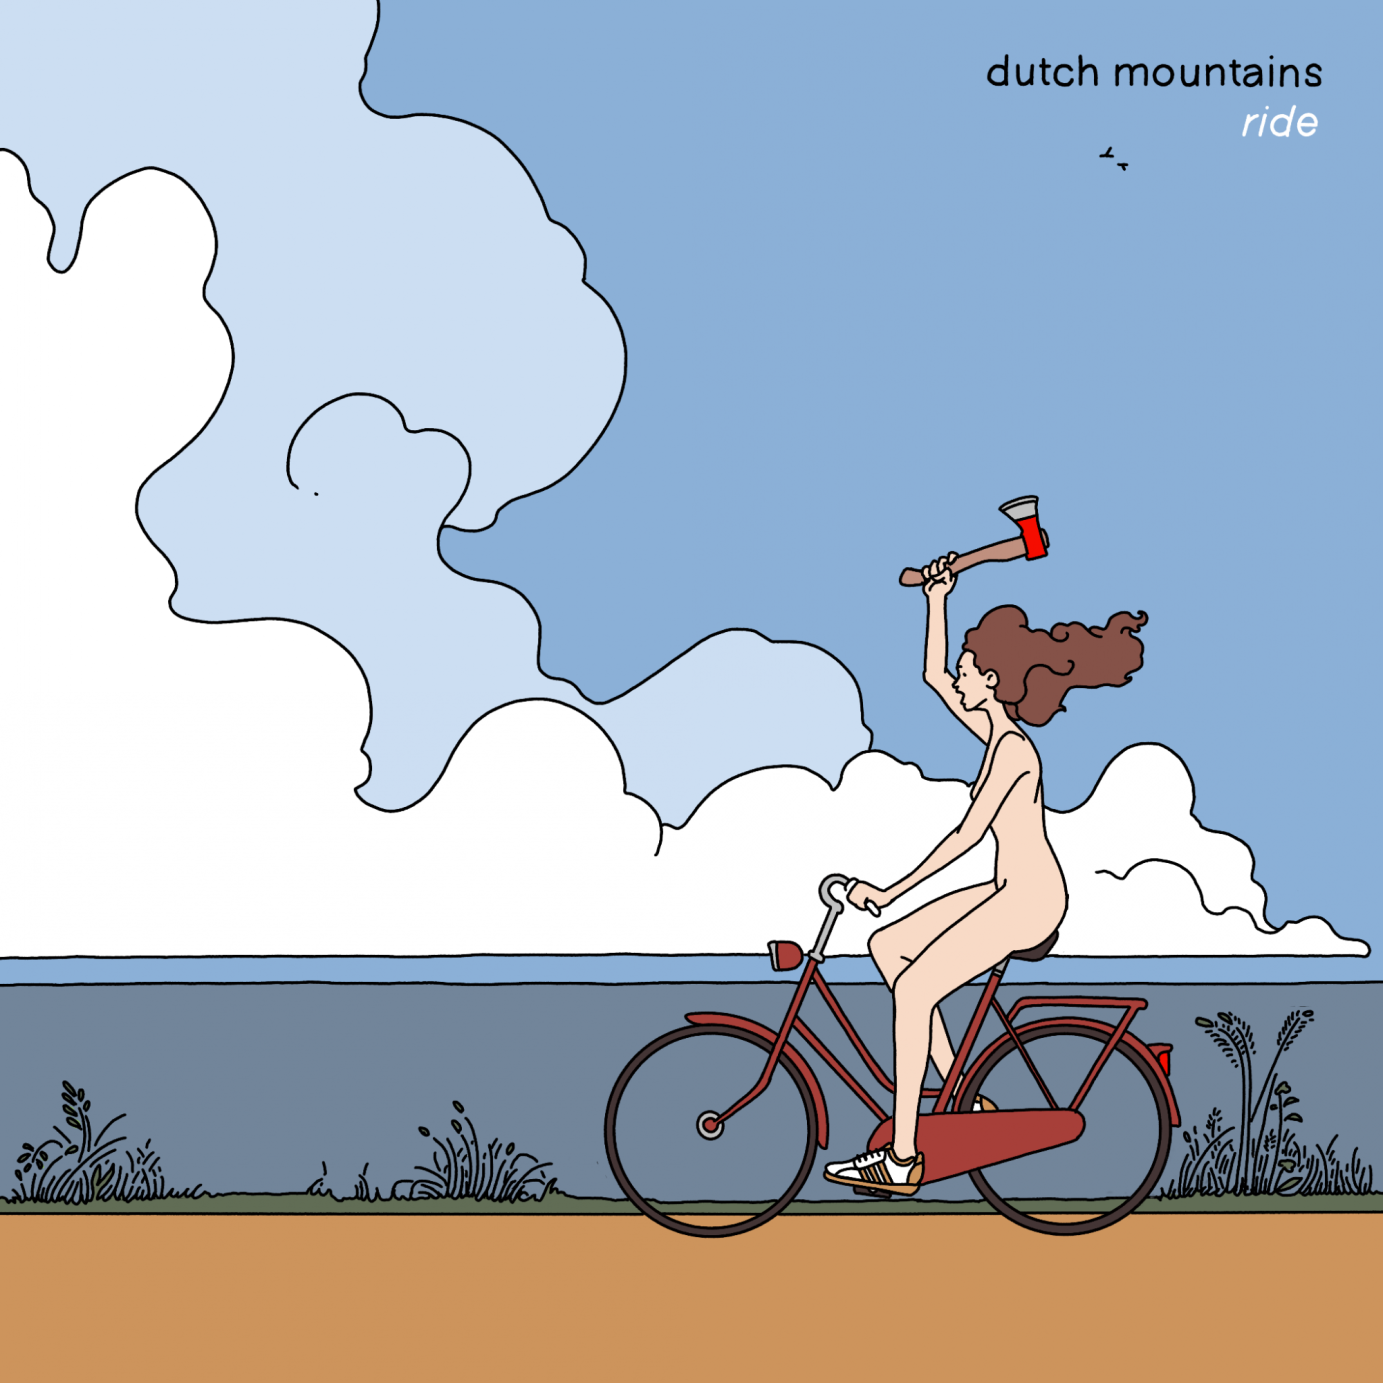 Dutch Mountains Cover for "Ride"